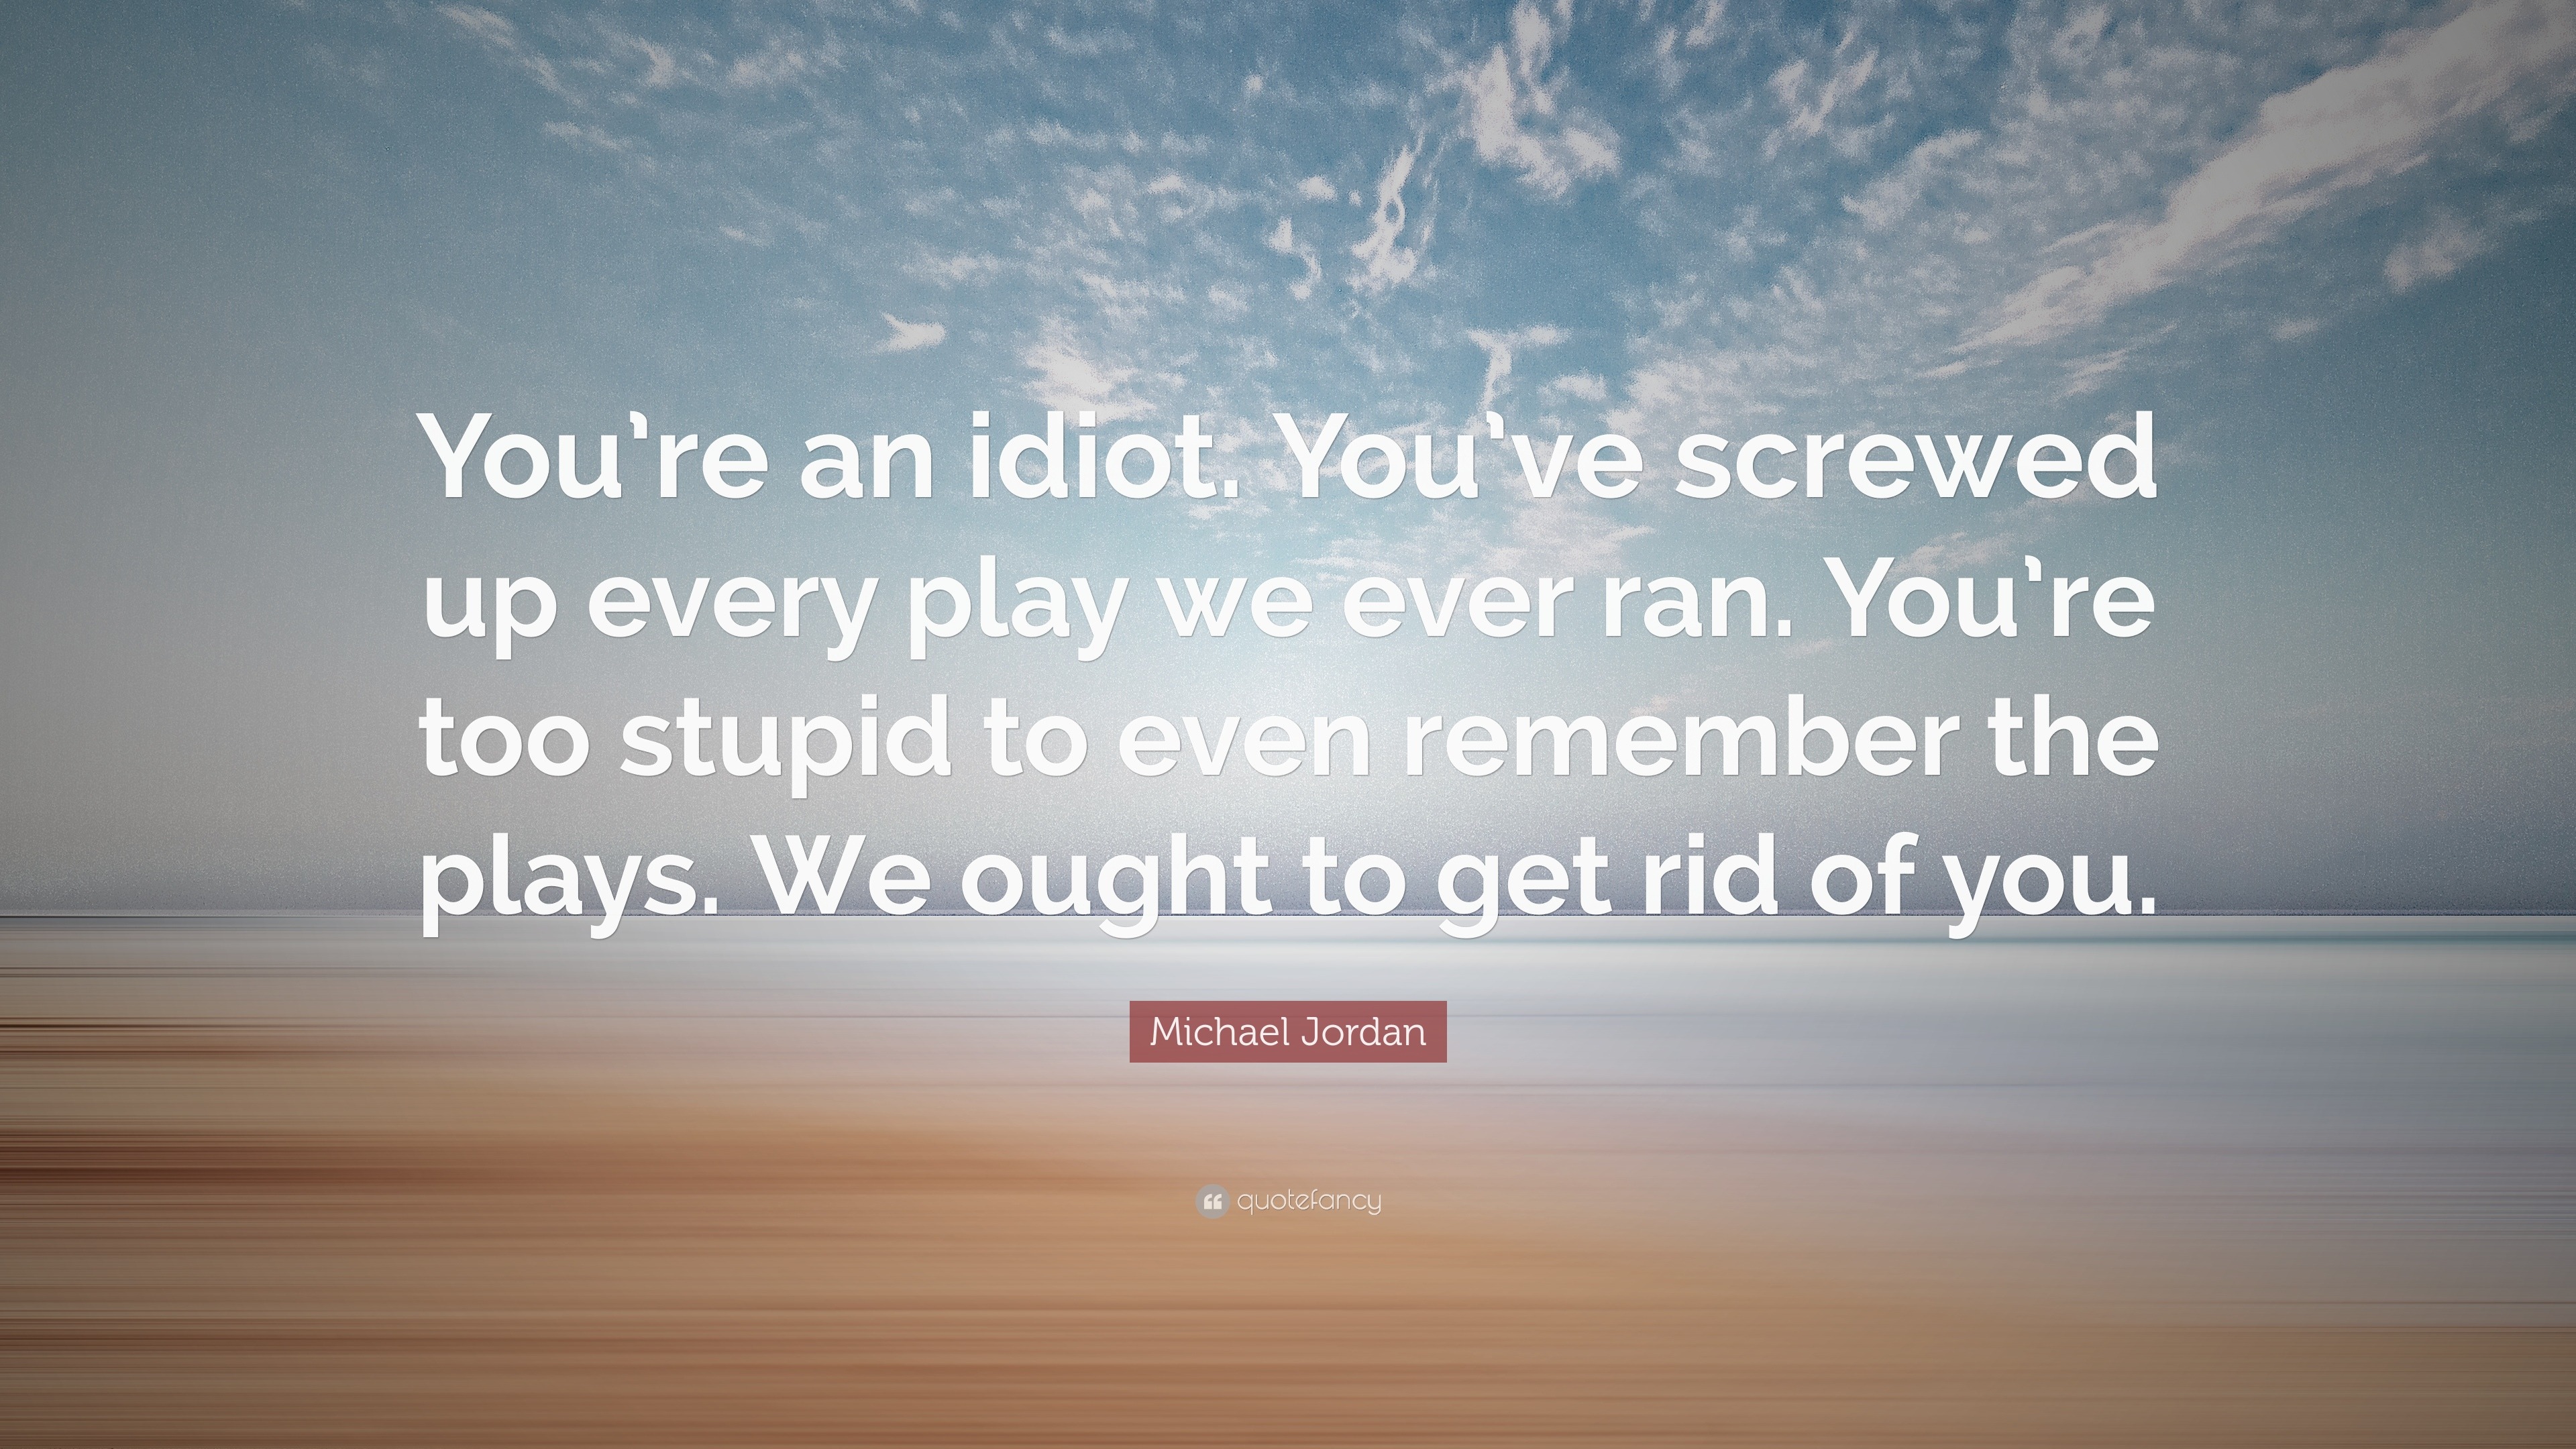 You're An Idiot. @josh90707 #quote Greeting Card by Morgan M